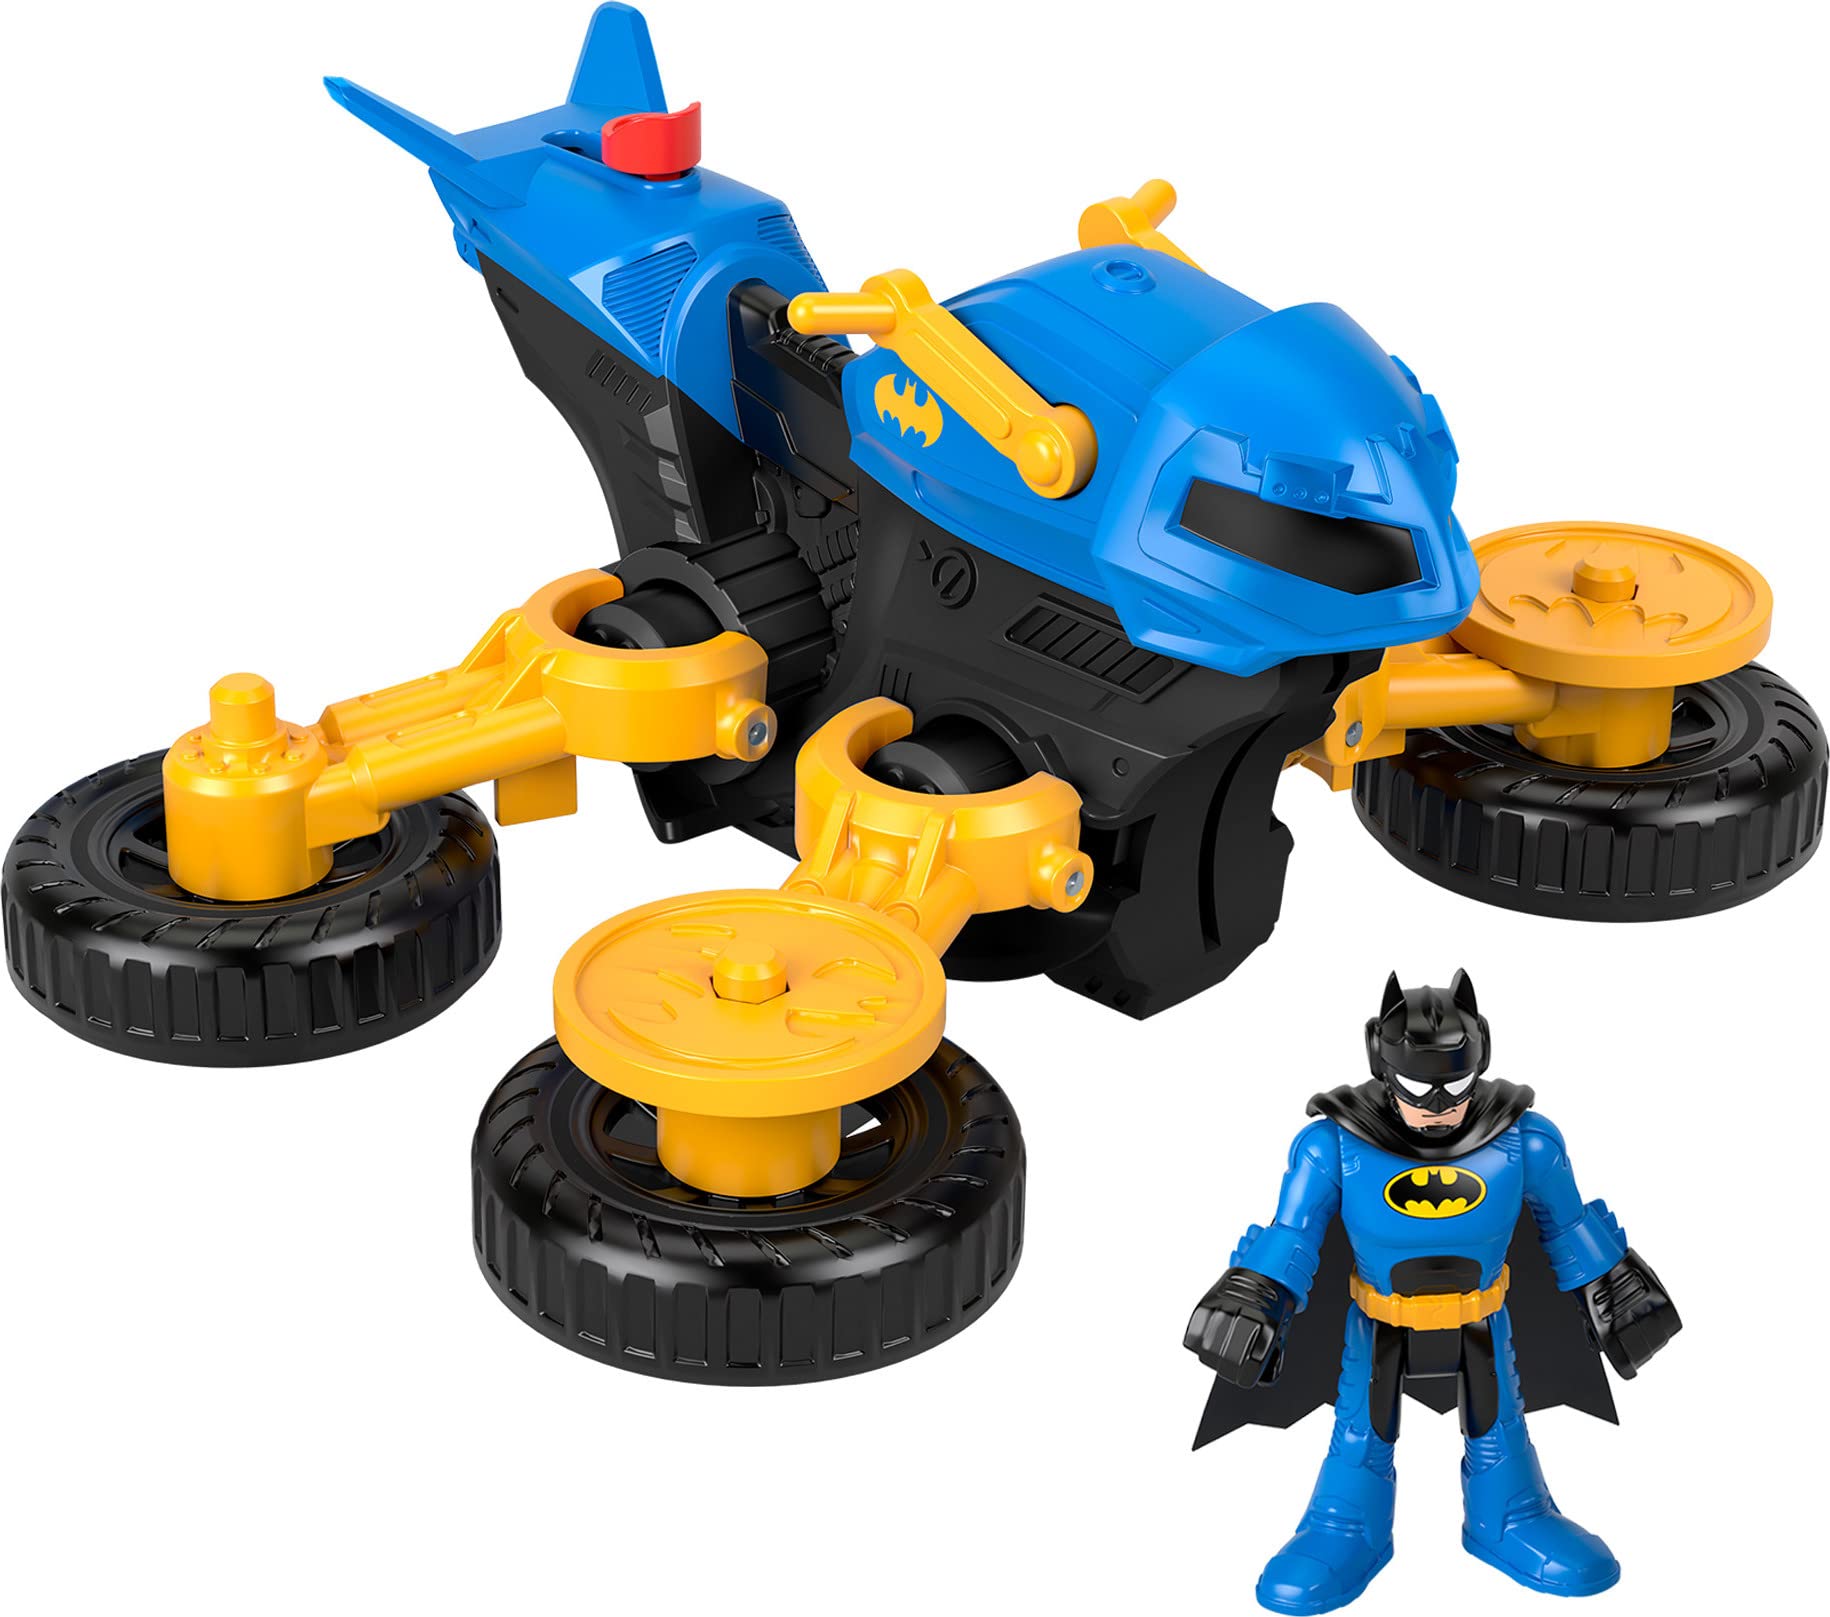 Fisher-Price Imaginext DC Super Friends Batman Toy Poseable Figure & Transforming Batcycle with Projectile Launcher for Preschool Kids Ages 3+ Years